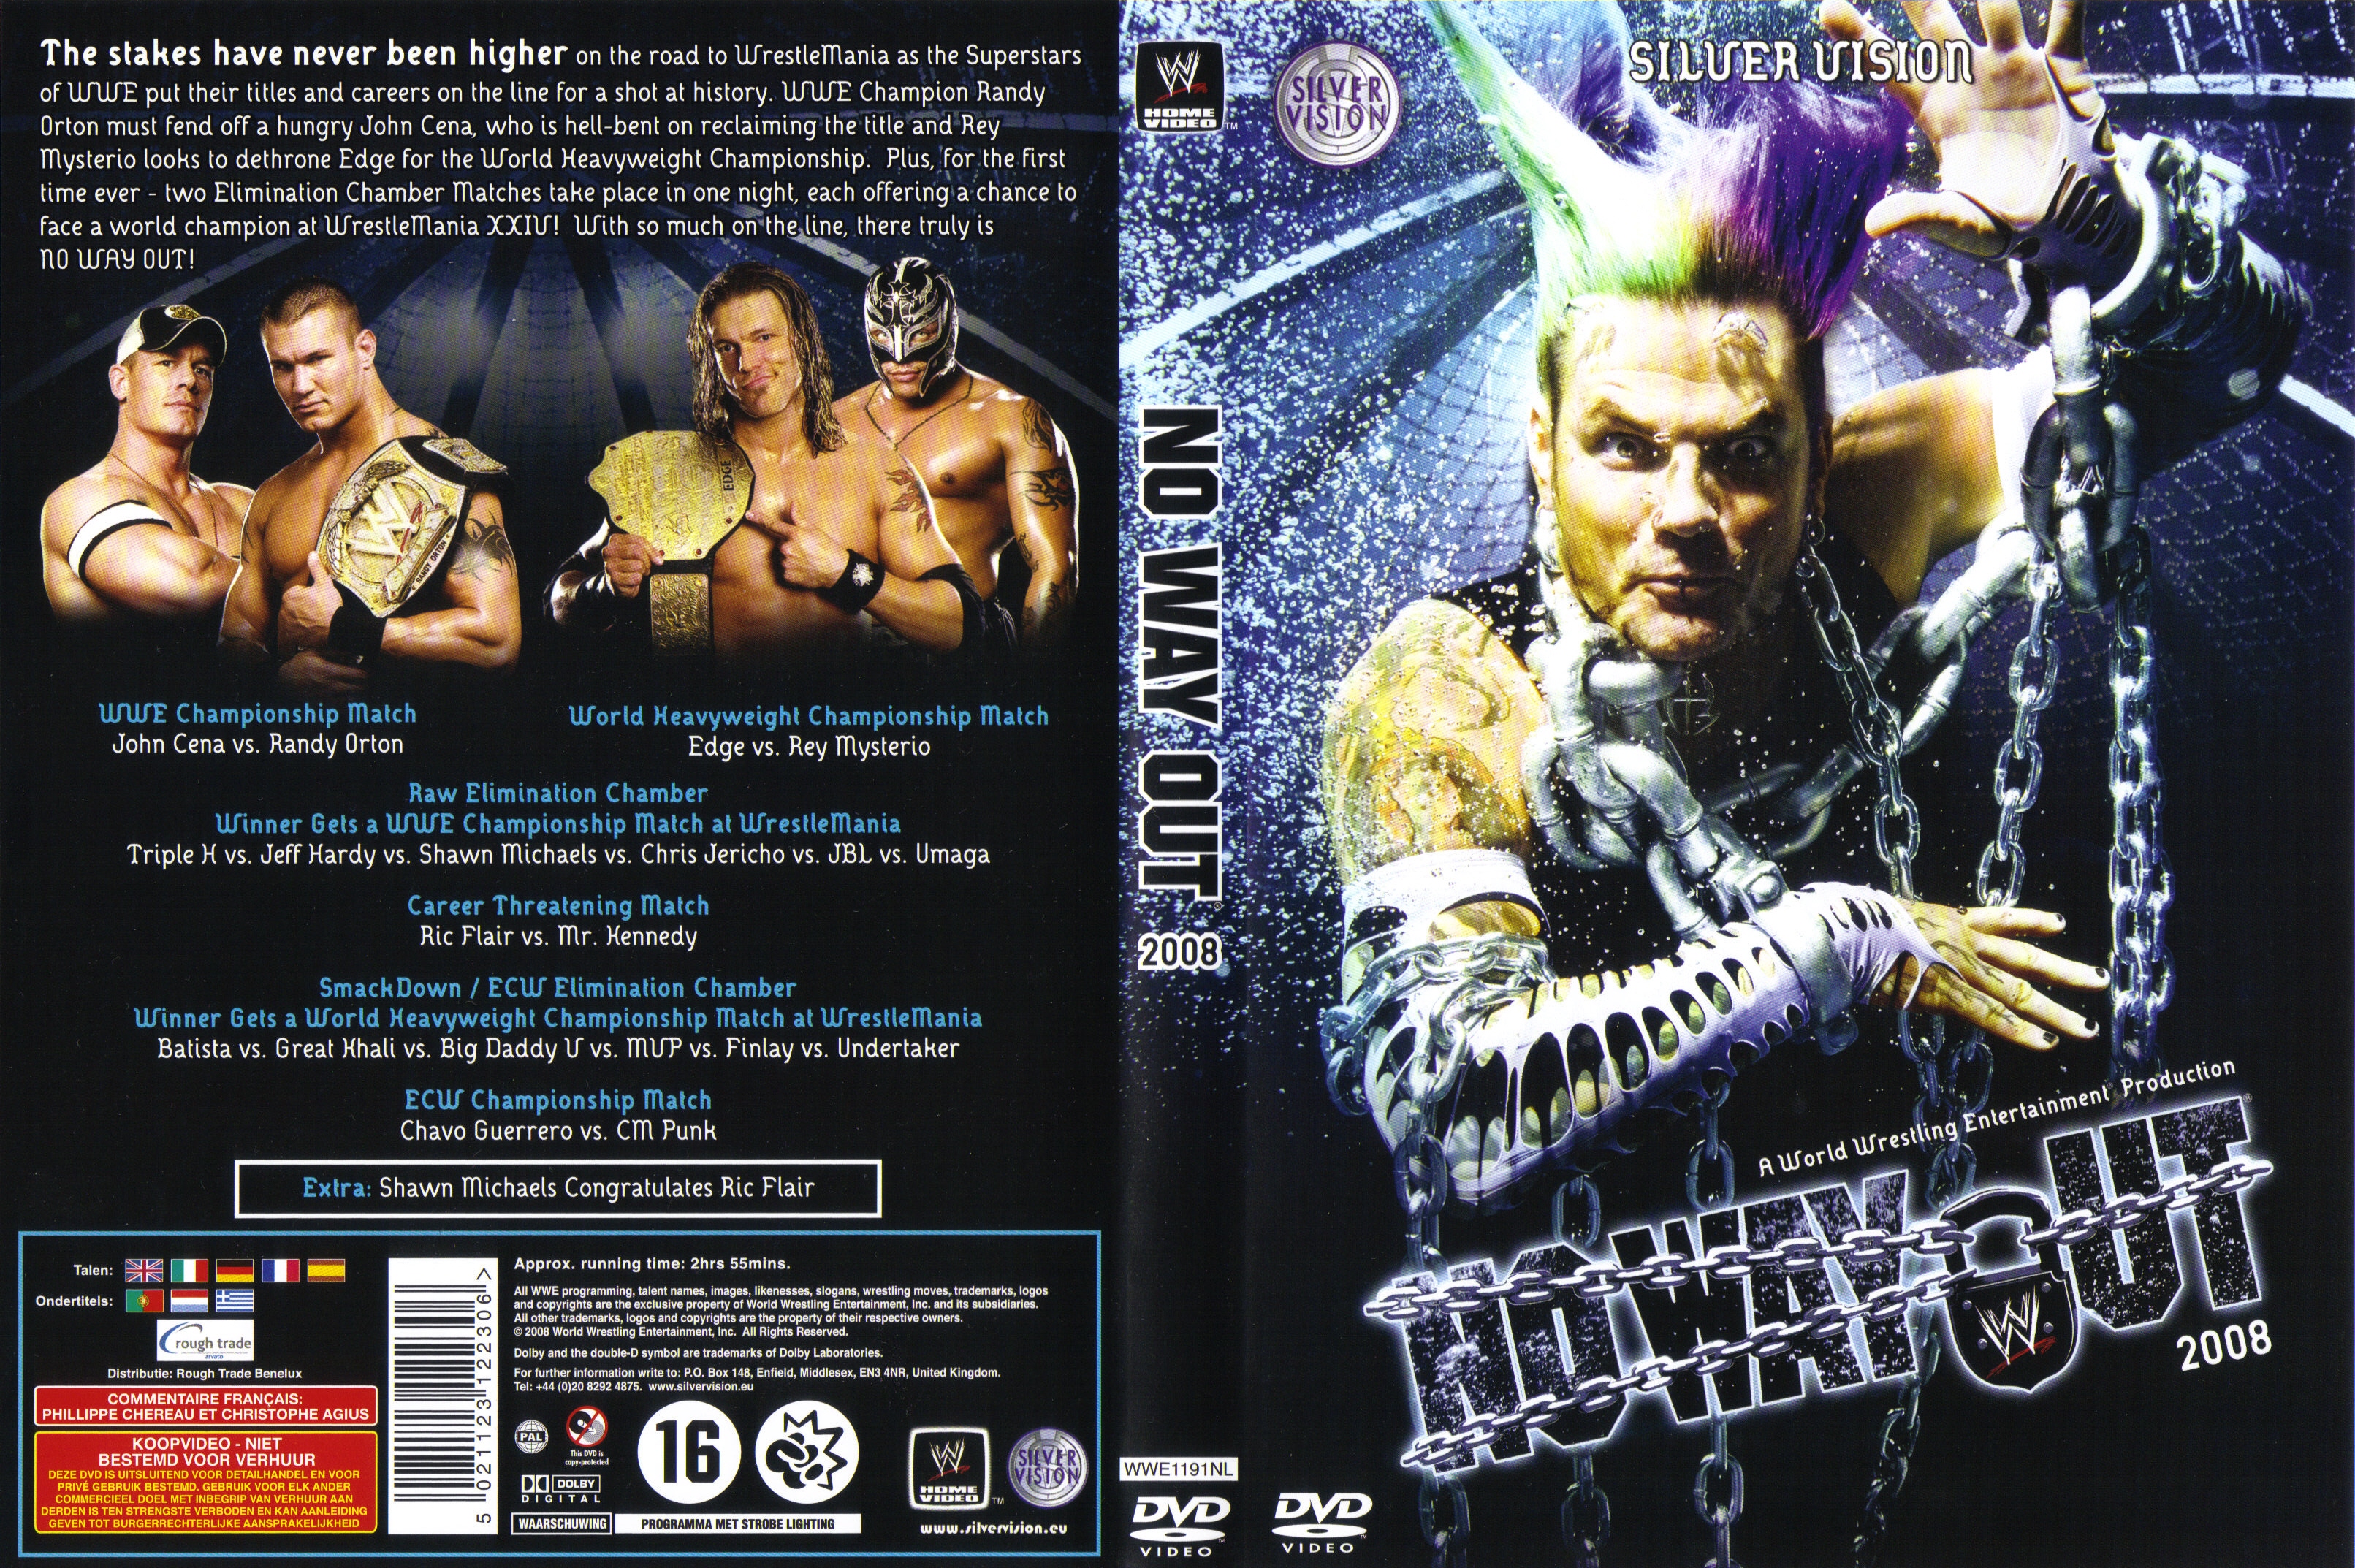 Jaquette DVD WWE No way out 2008